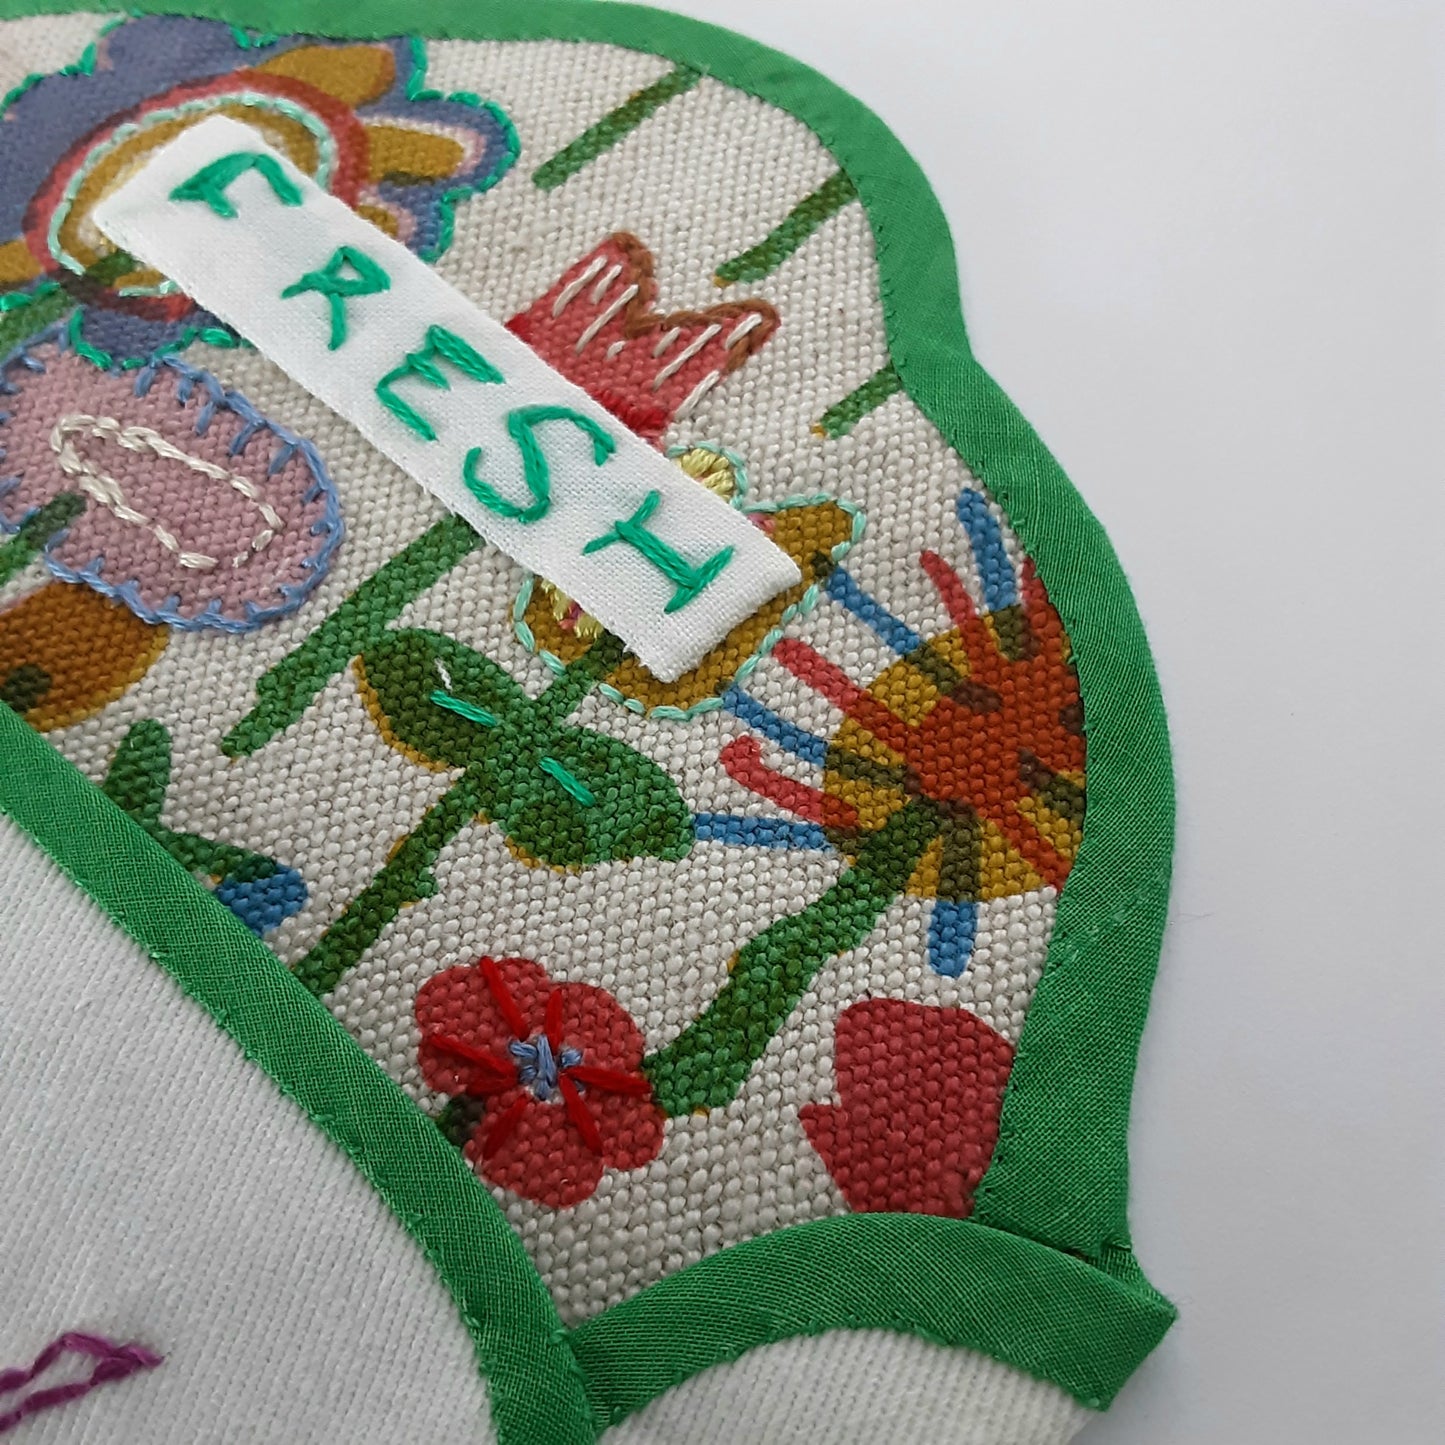 Envelope Art With Hand Embroidery - Fresh Start